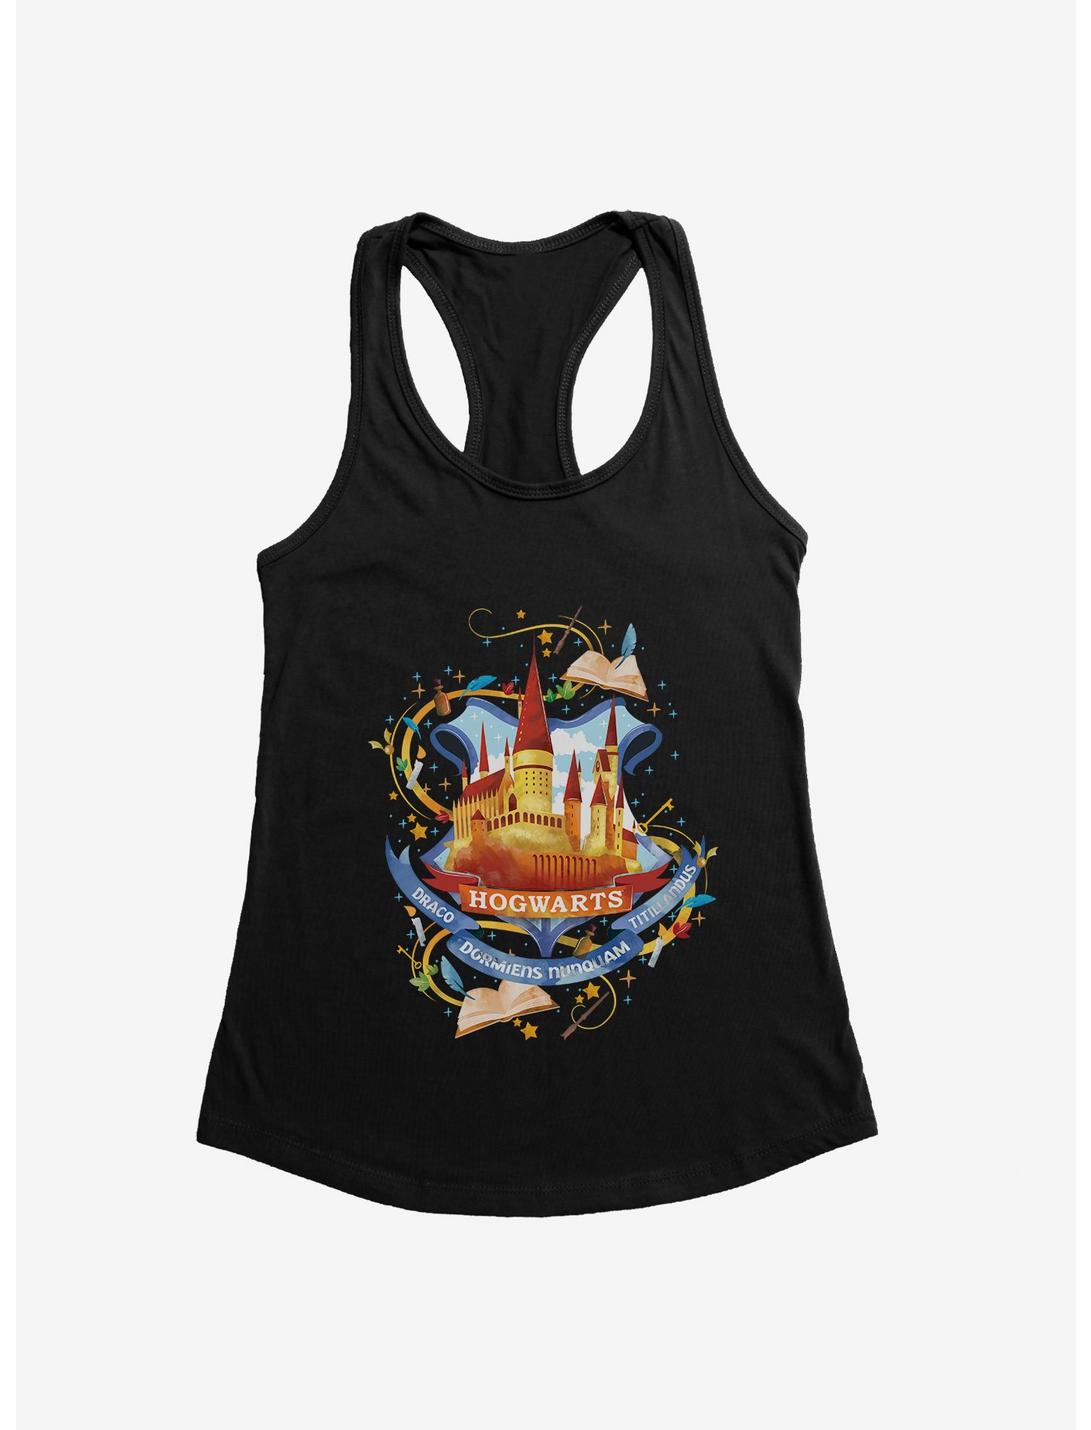 Harry Potter Hogwarts School Of Witchcraft And Wizardry Womens Tank, BLACK, hi-res